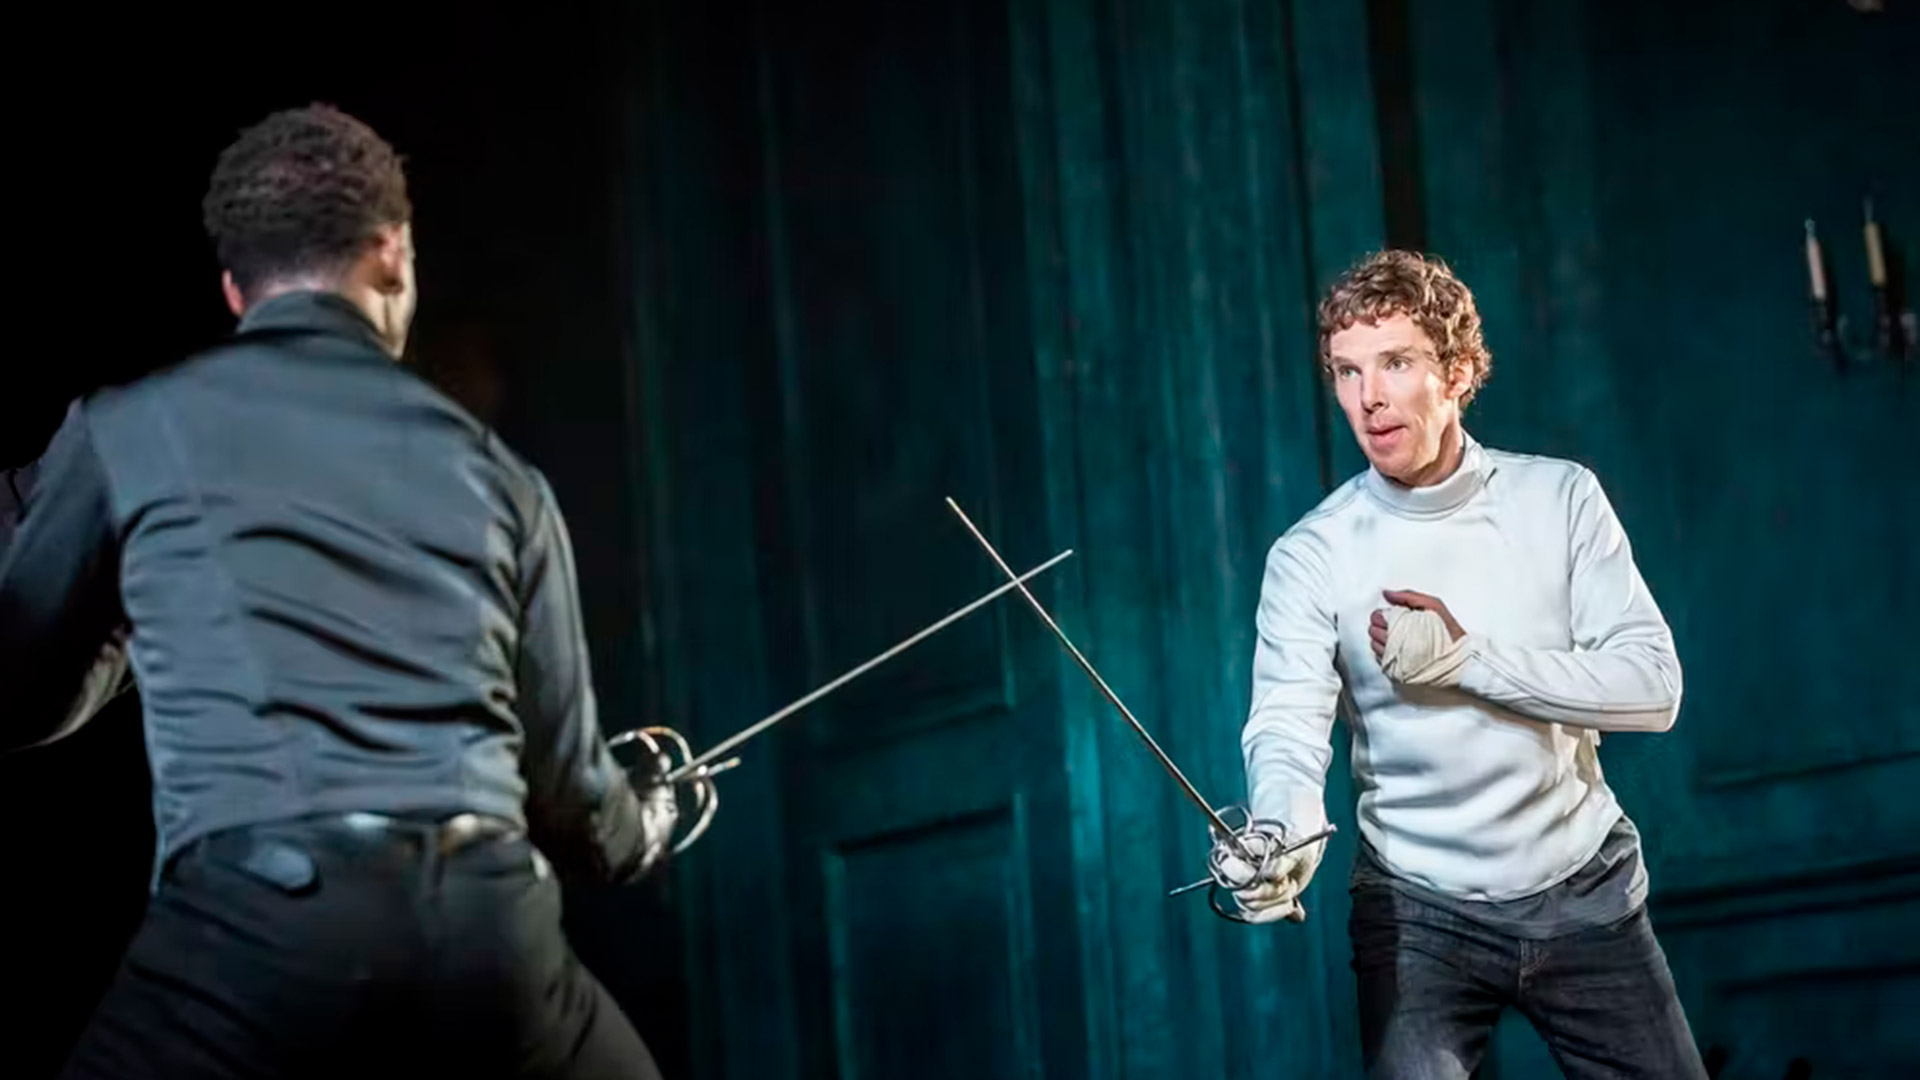 Benedict Cumberbatch as Hamlet and Kobna Holdbrook-Smith as Laertes in National Theatre's Hamlet, which was shot at the Barbican Theater in 2015. National Theatre/Amazon Prime Video